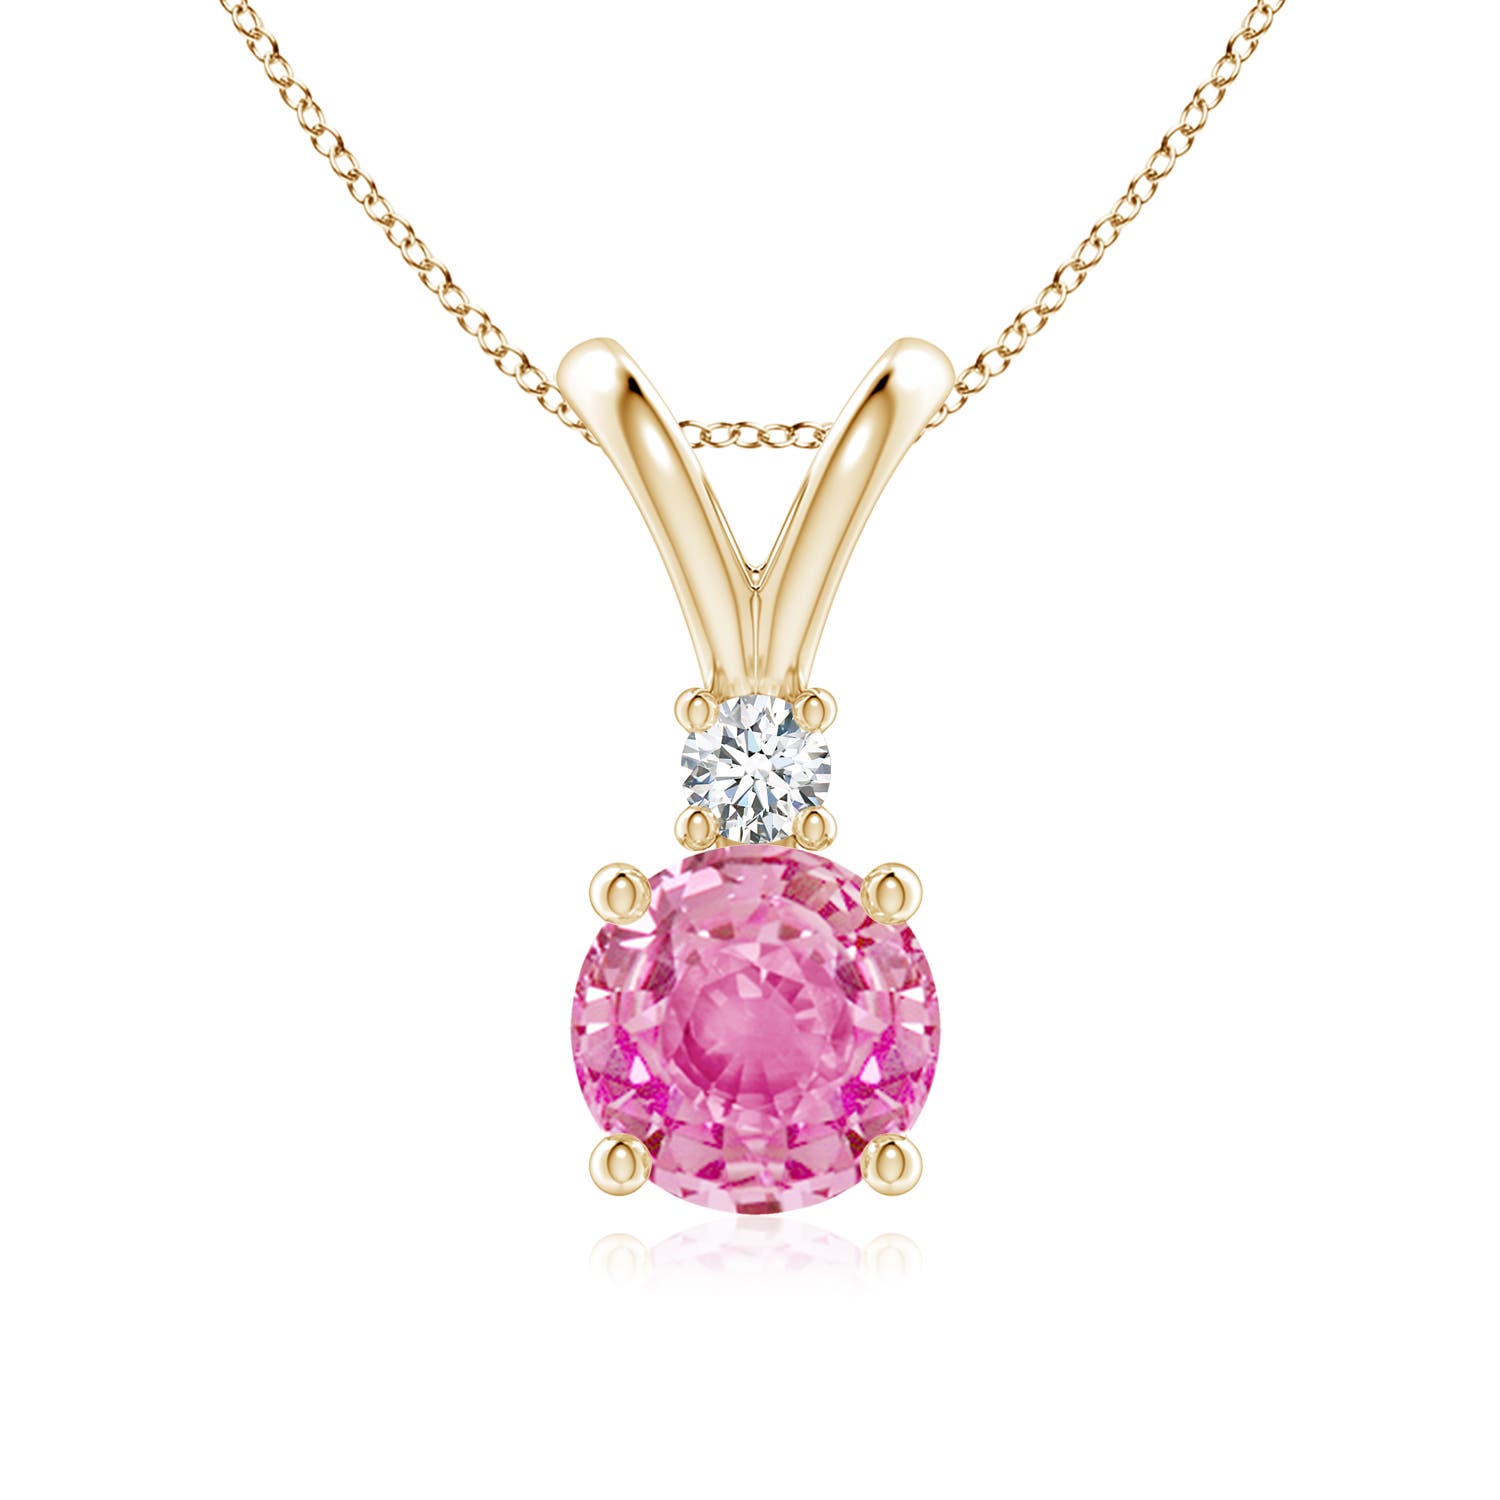 AA - Pink Sapphire / 1.67 CT / 14 KT Yellow Gold